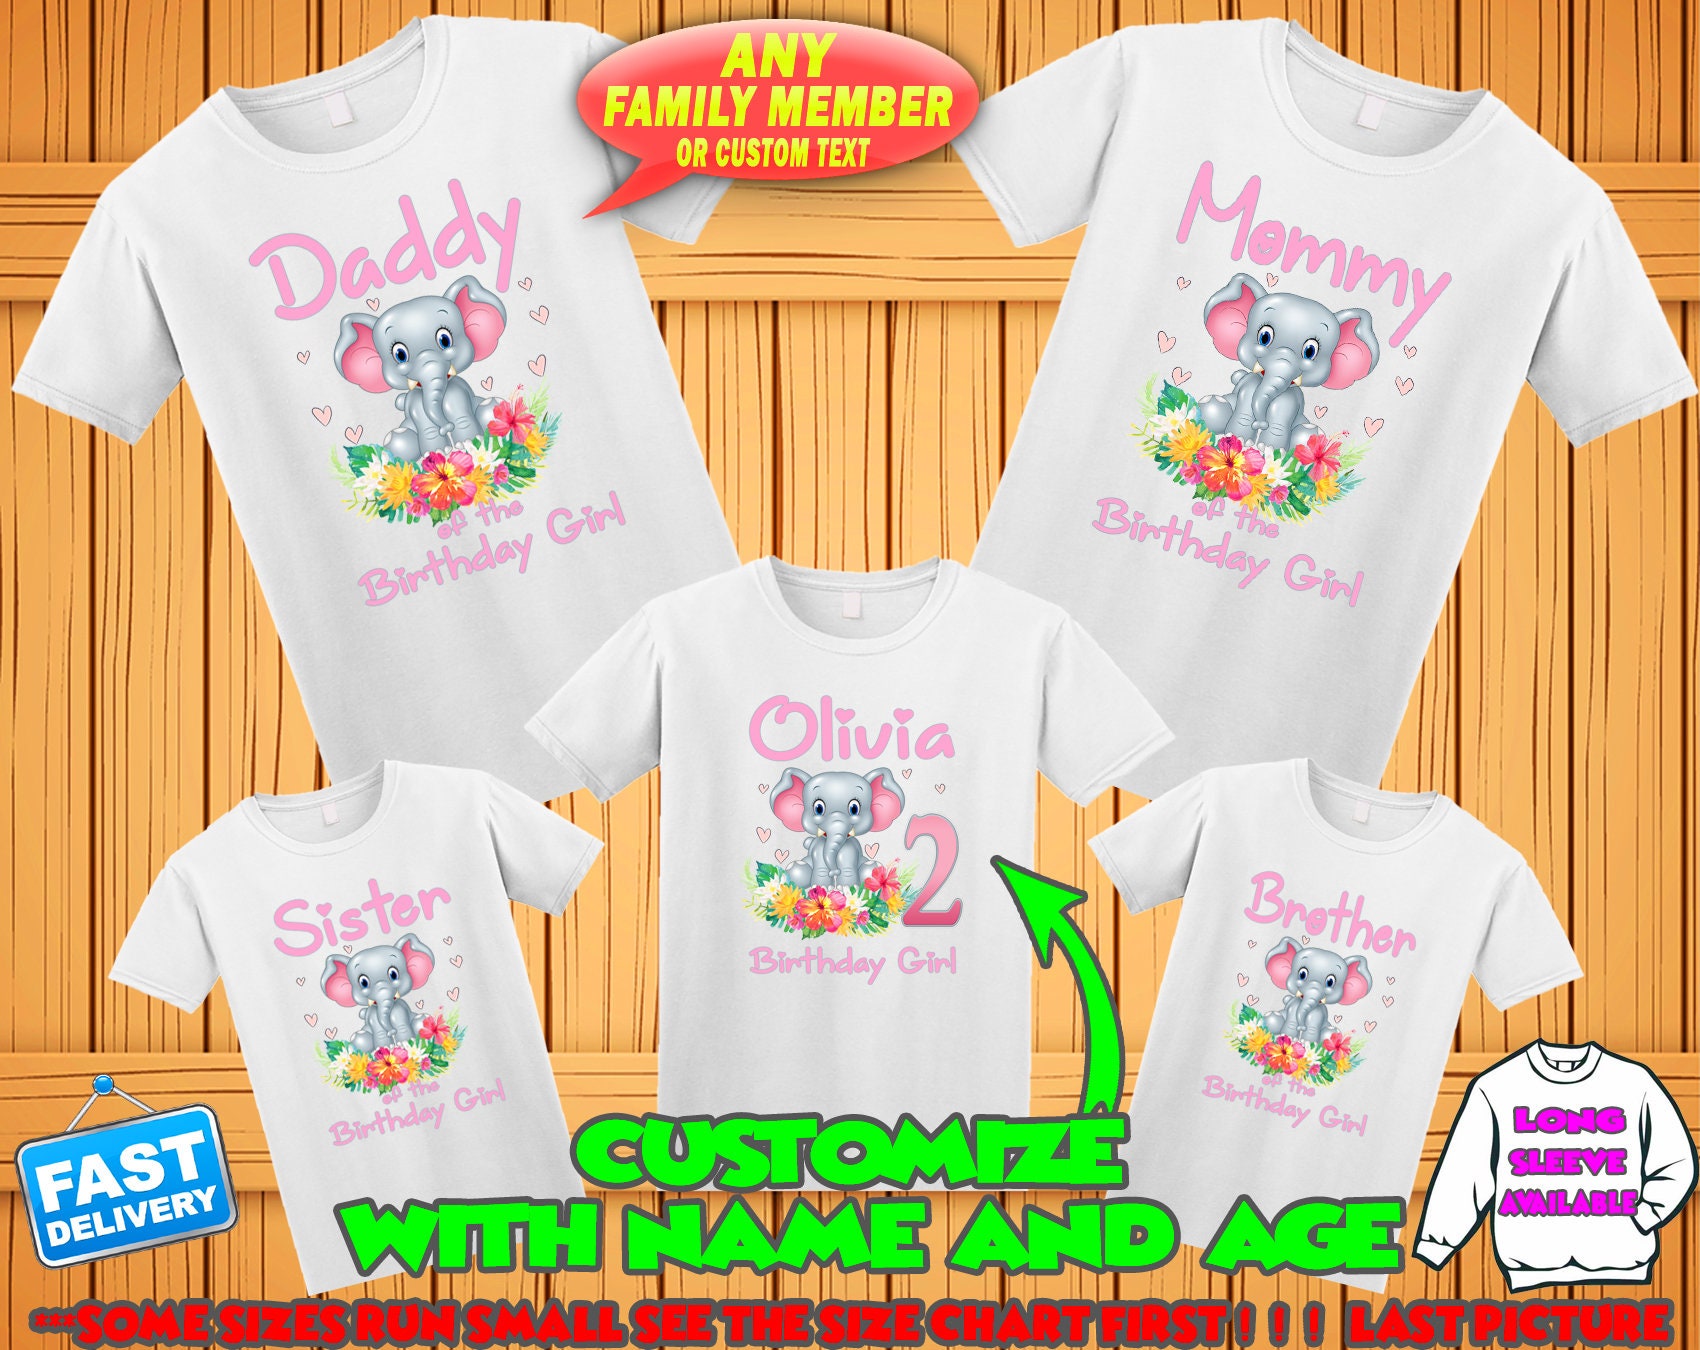 Discover Elephant Theme Party Family Matching Party Kid Shirt